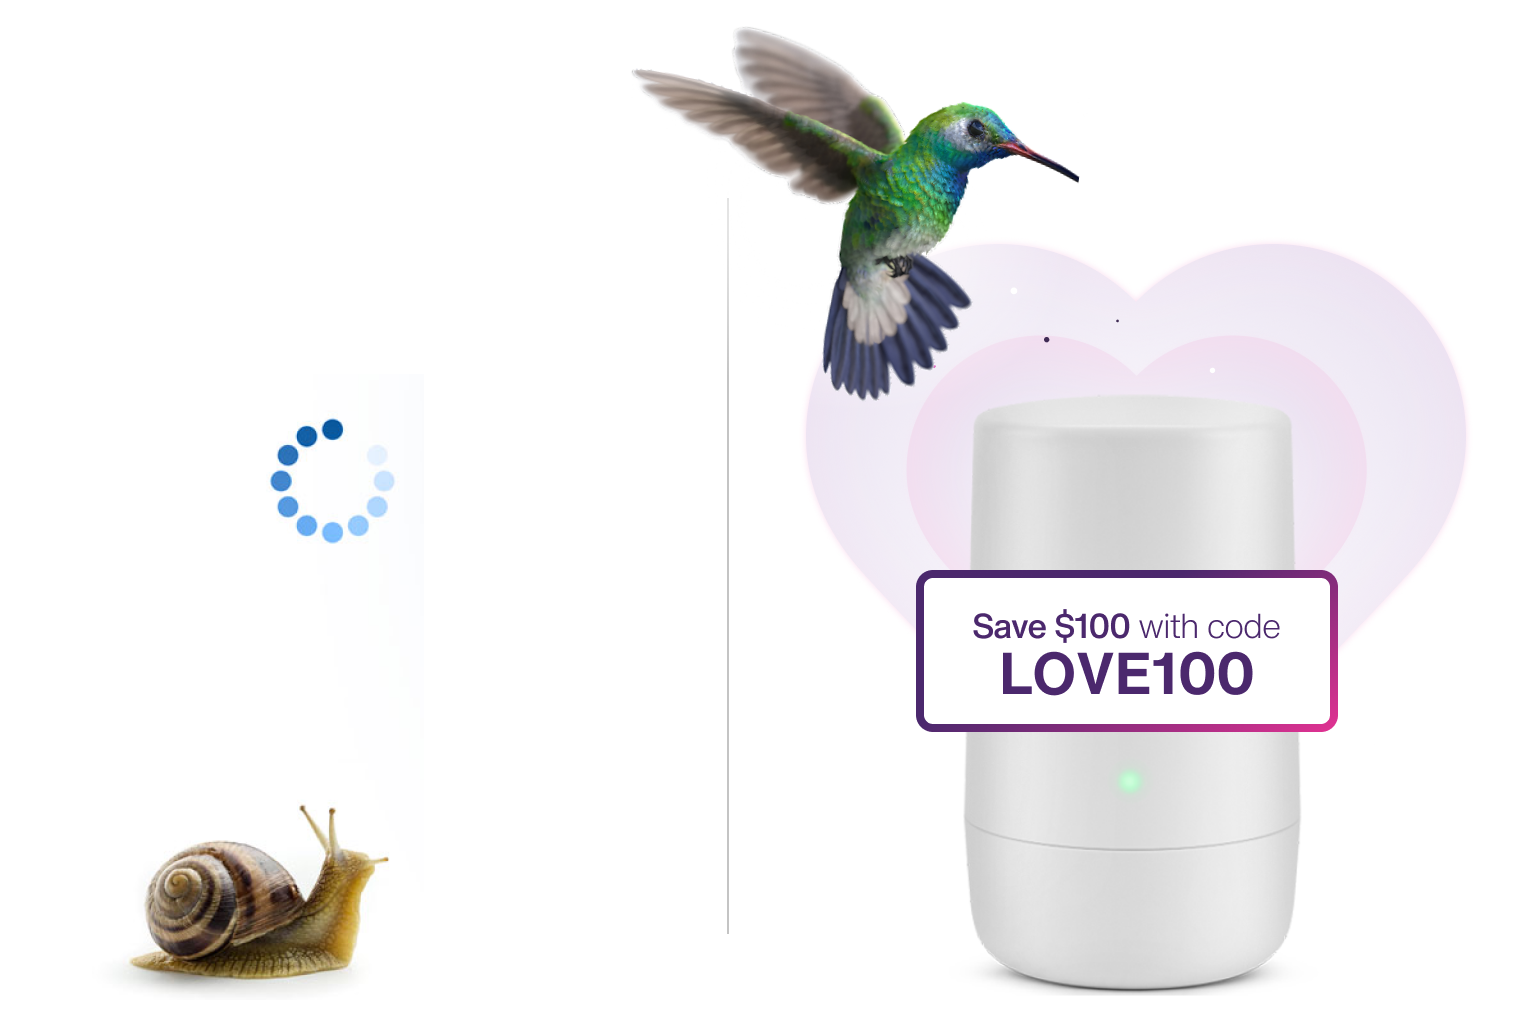 A slug with internet buffering compared to a Hummingbird flying over a WI-FI 6 device with heart shaped Wi-Fi waves behind and the words Save $150 with code LOVE100. 